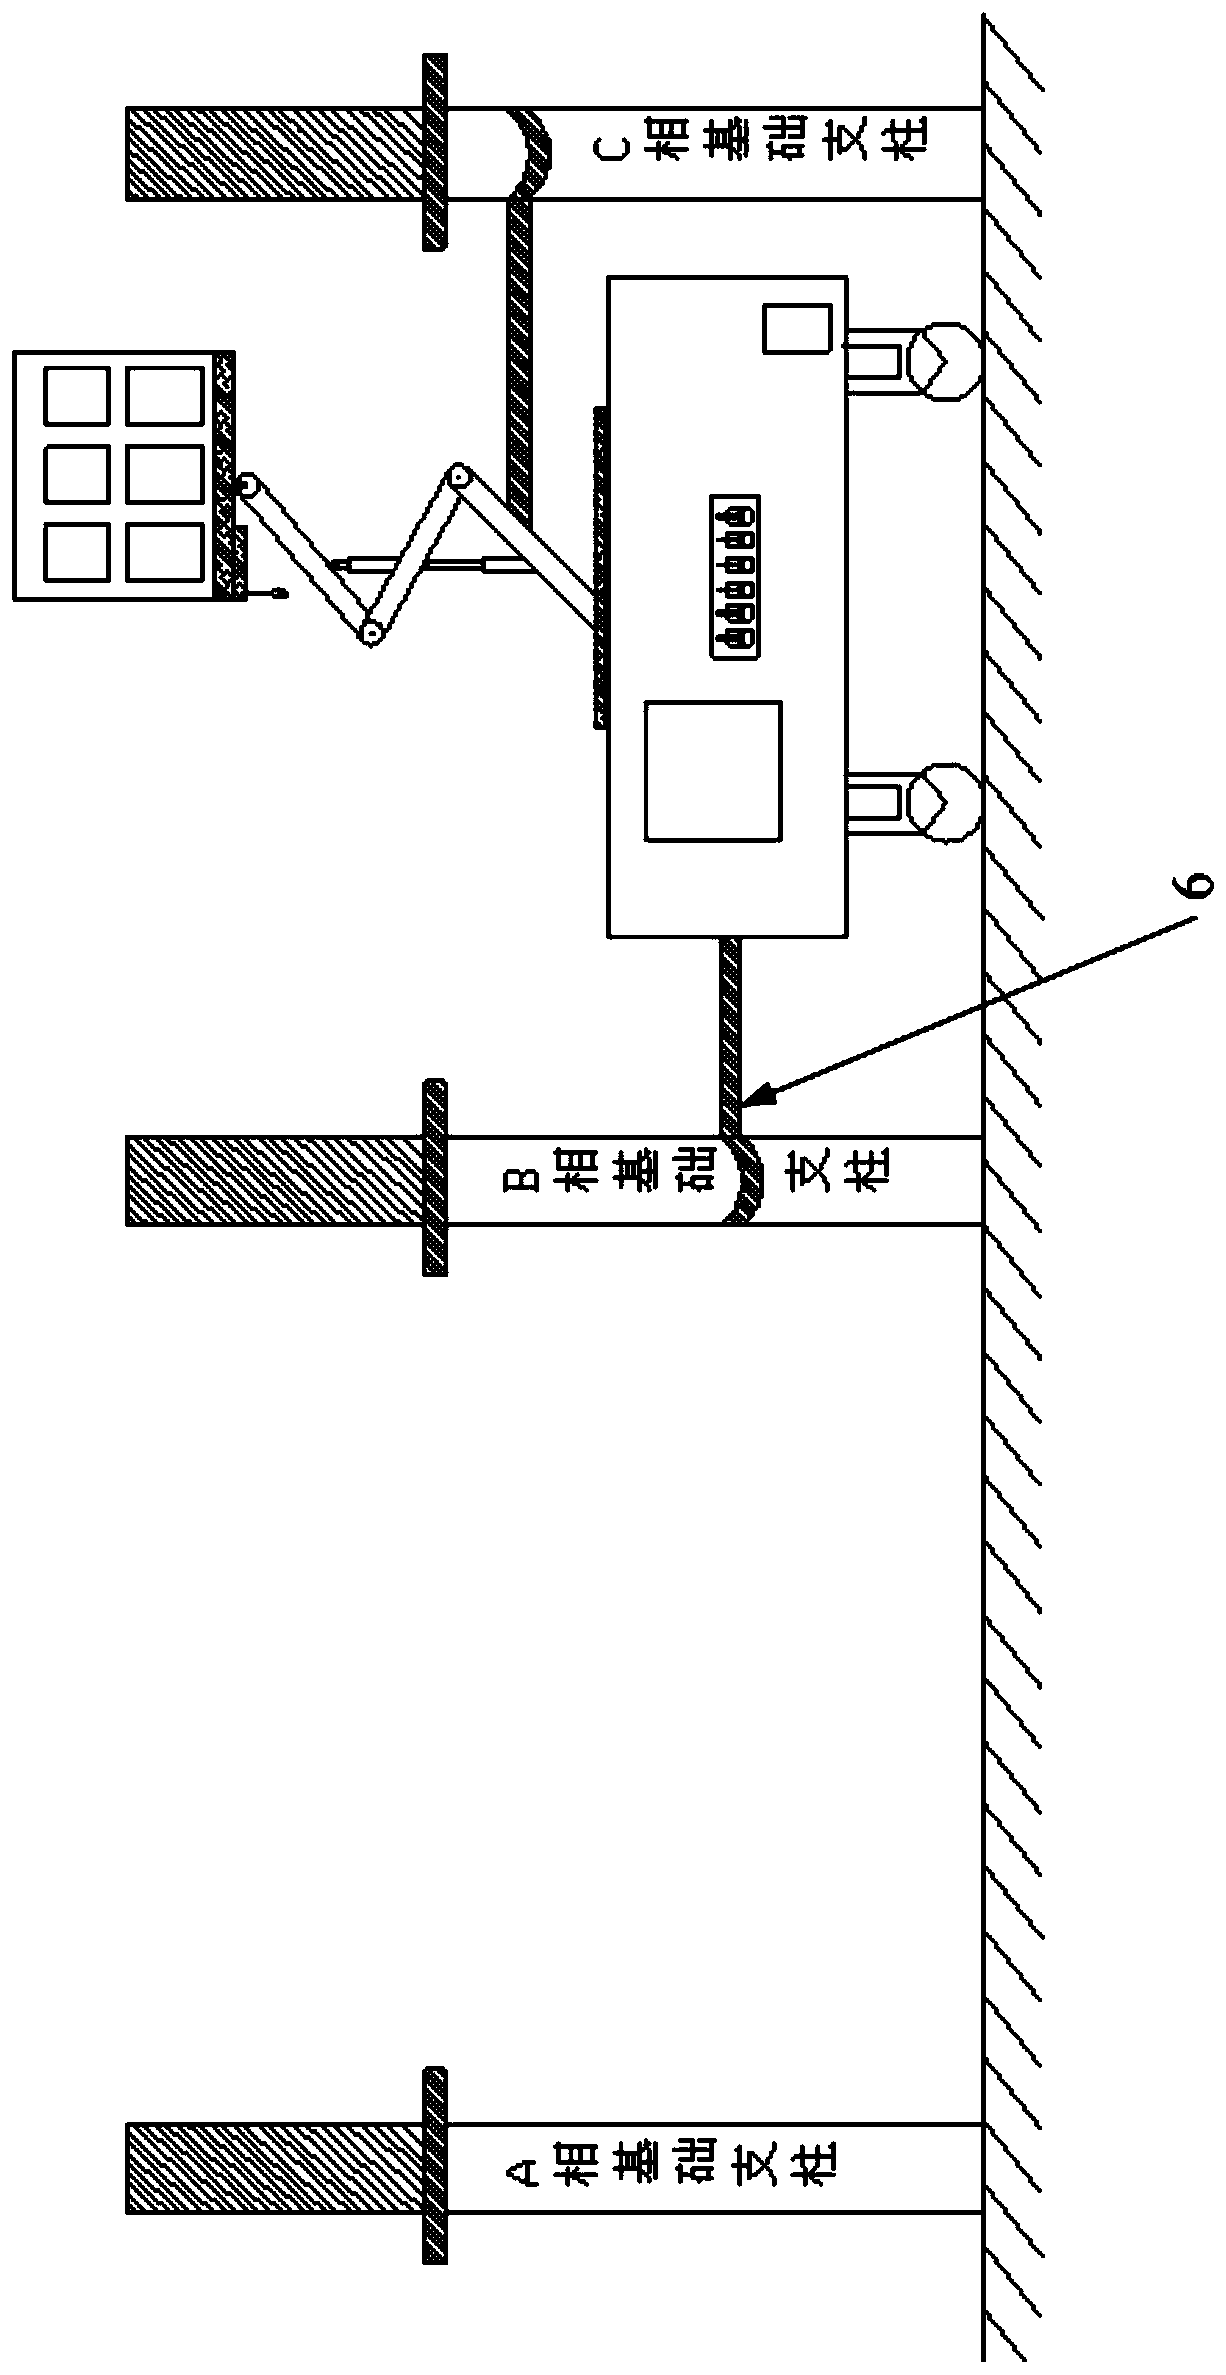 Auxiliary device for overhauling electric equipment